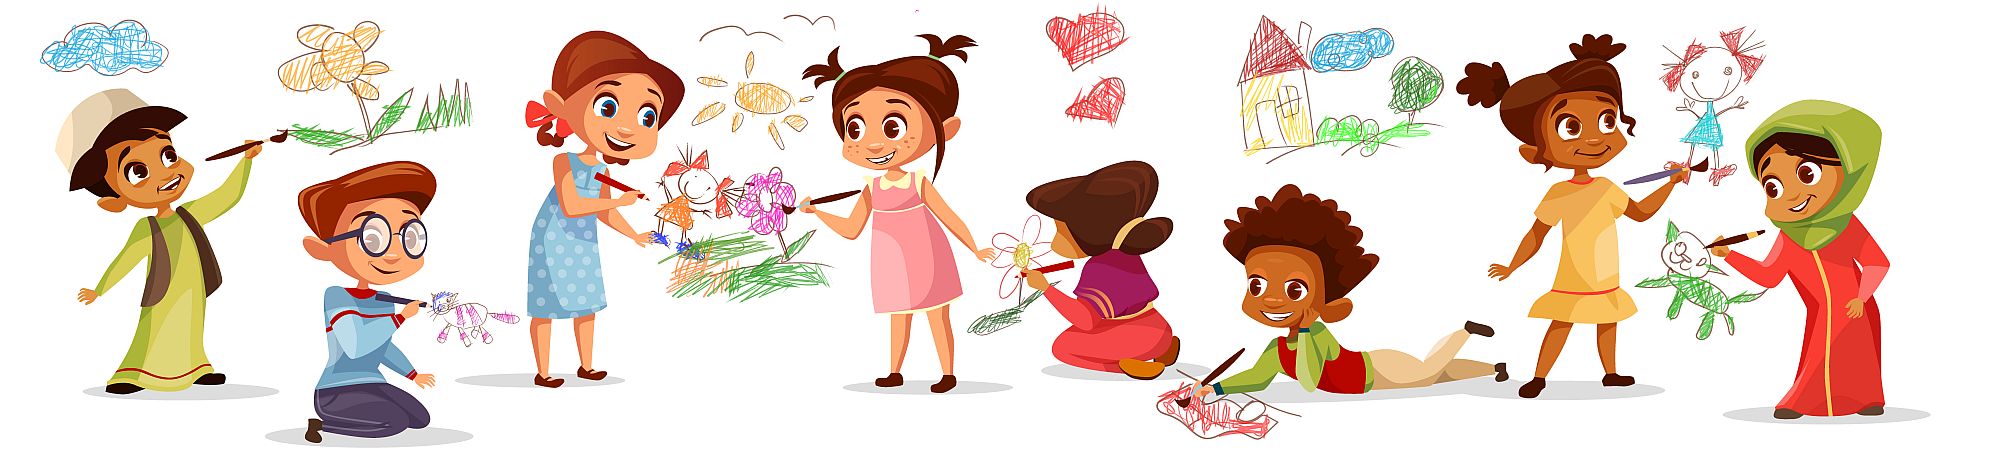 Children drawing with pencils vector illustration of different nationality cartoon boys and girls kids painting with color chalks